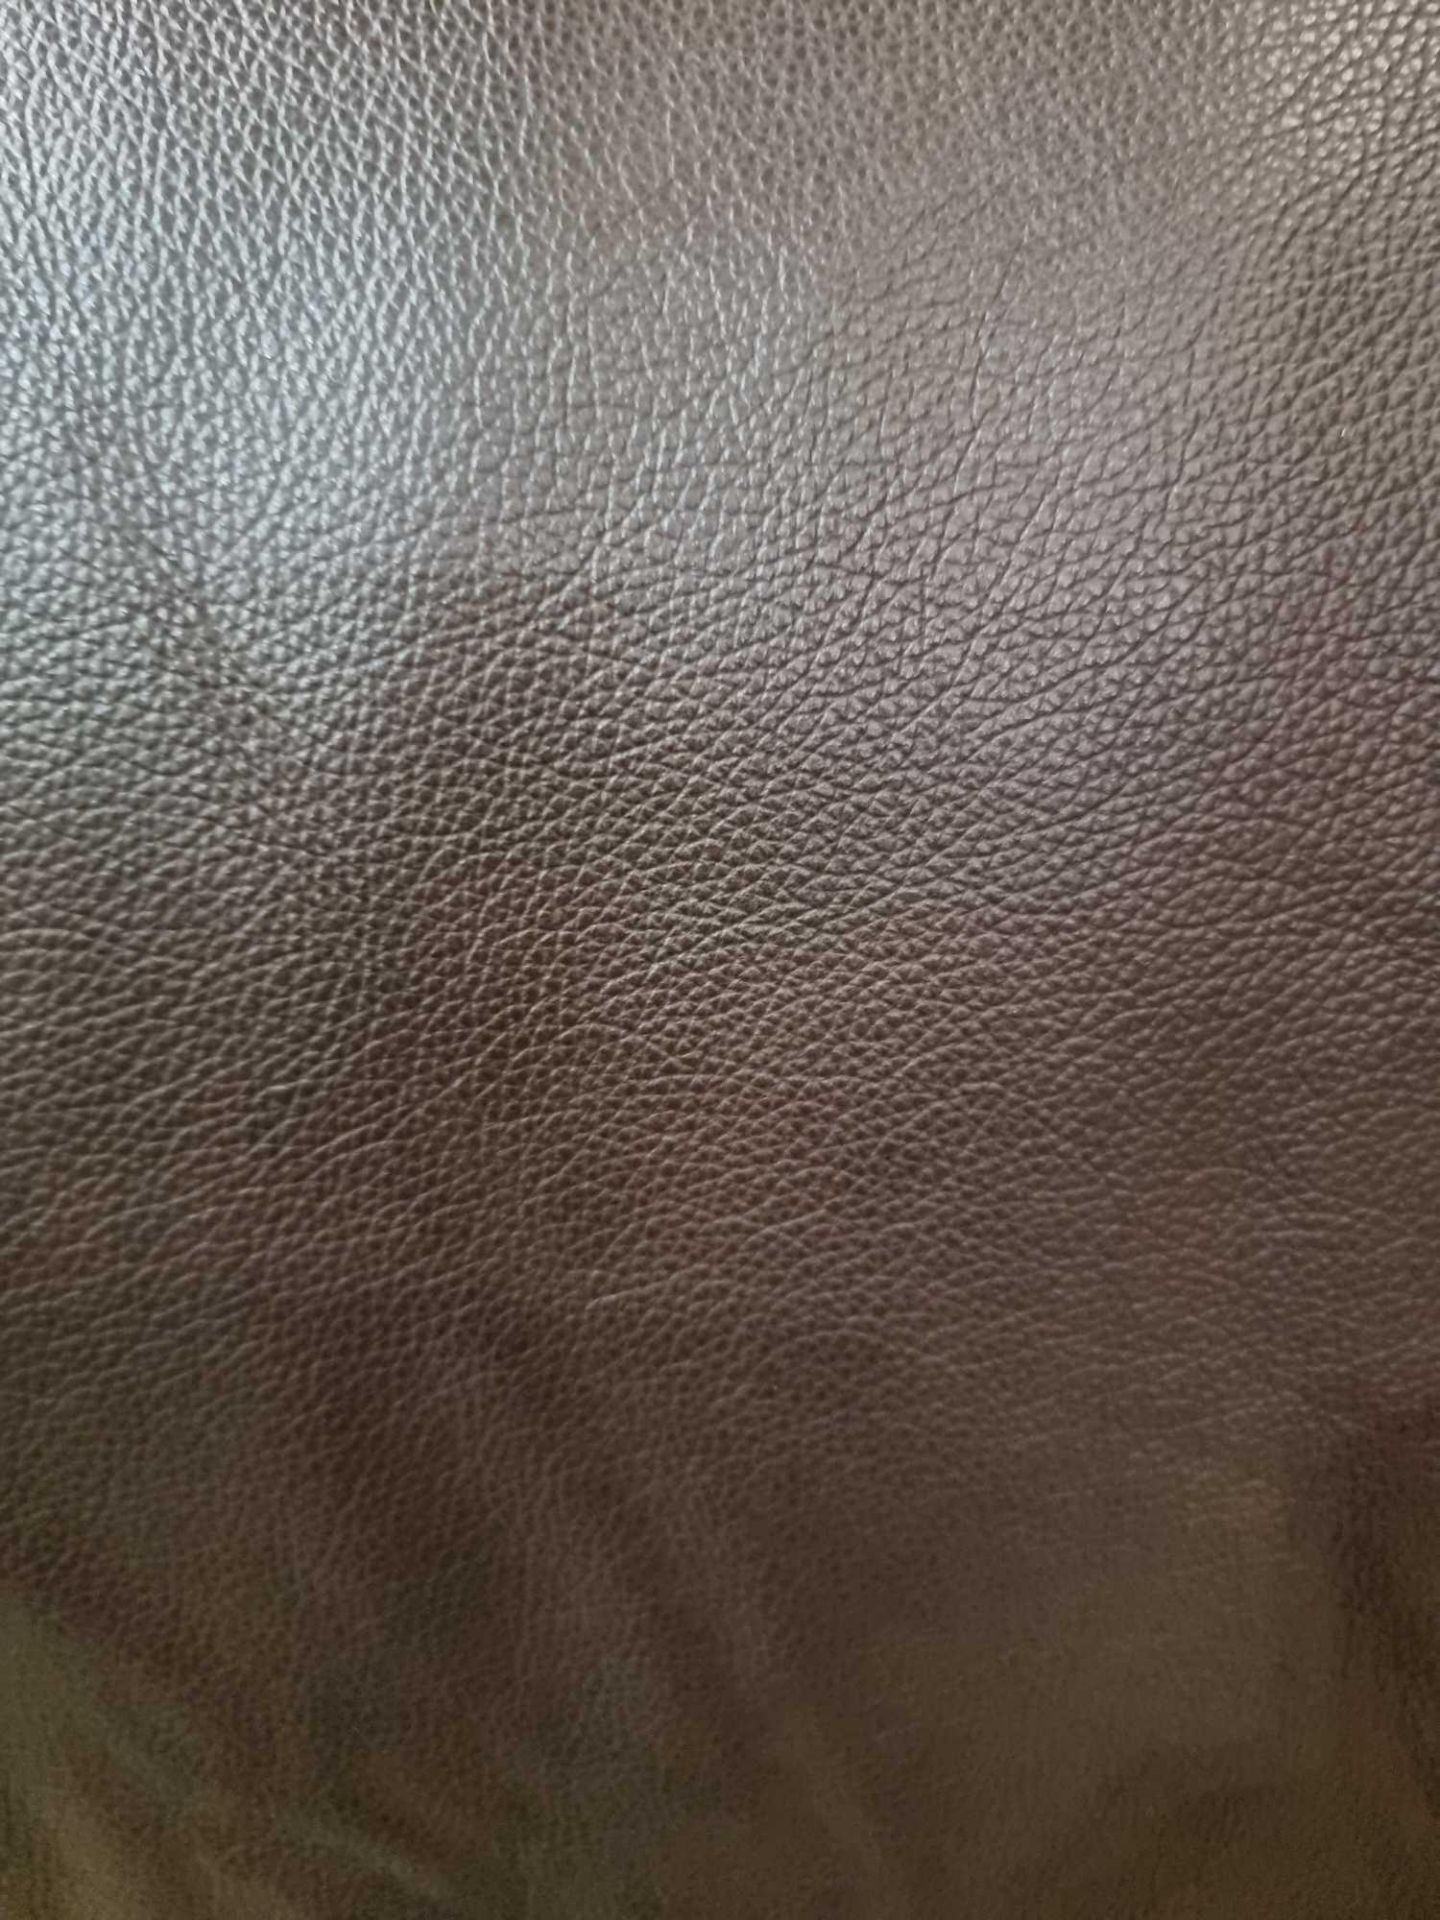 Mastrotto Hudson Chocolate Leather Hide approximately 3 99M2 2 1 x 1 9cm ( Hide No,112)